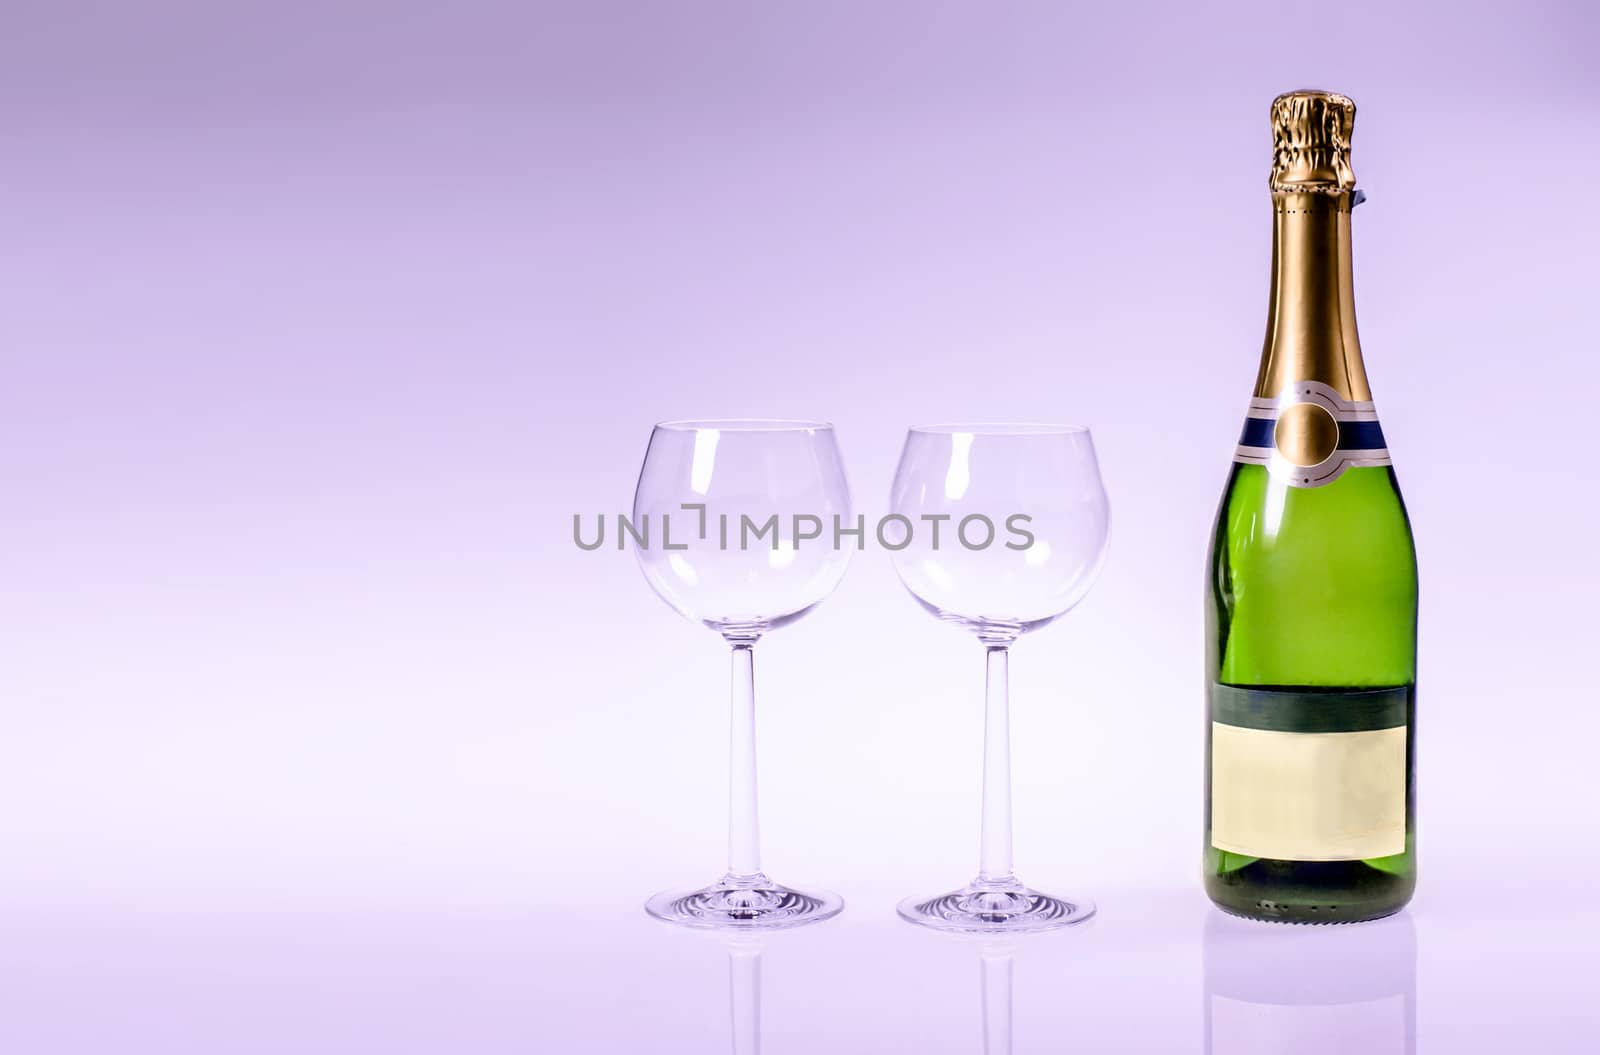 Champagen bottle with two glasses on a purple background